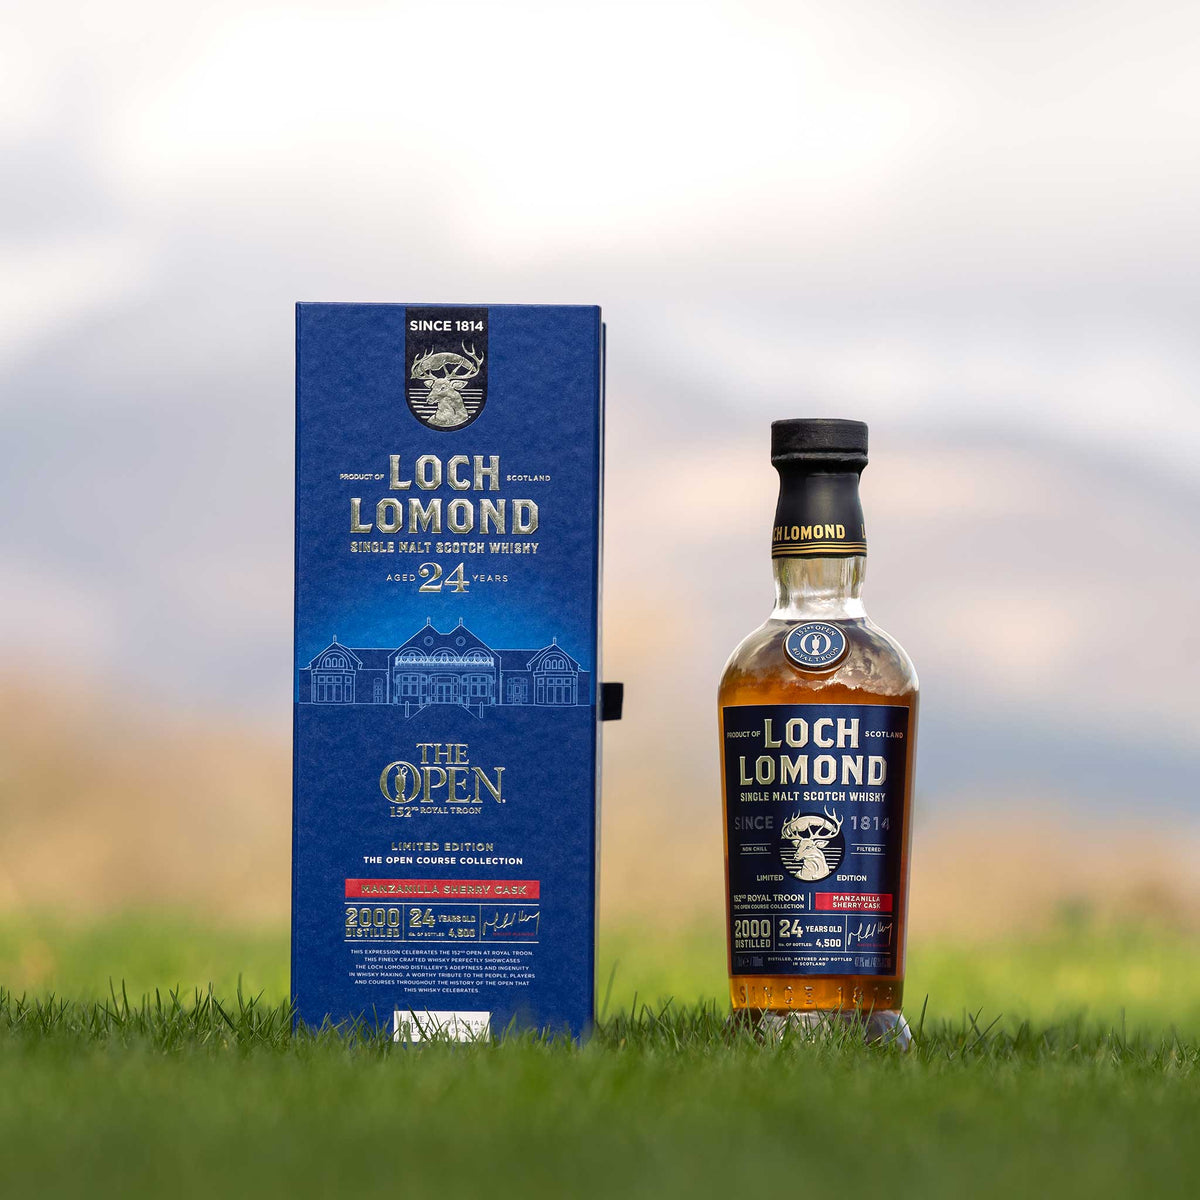 Open Course Collection Royal Troon - Loch Lomond Group